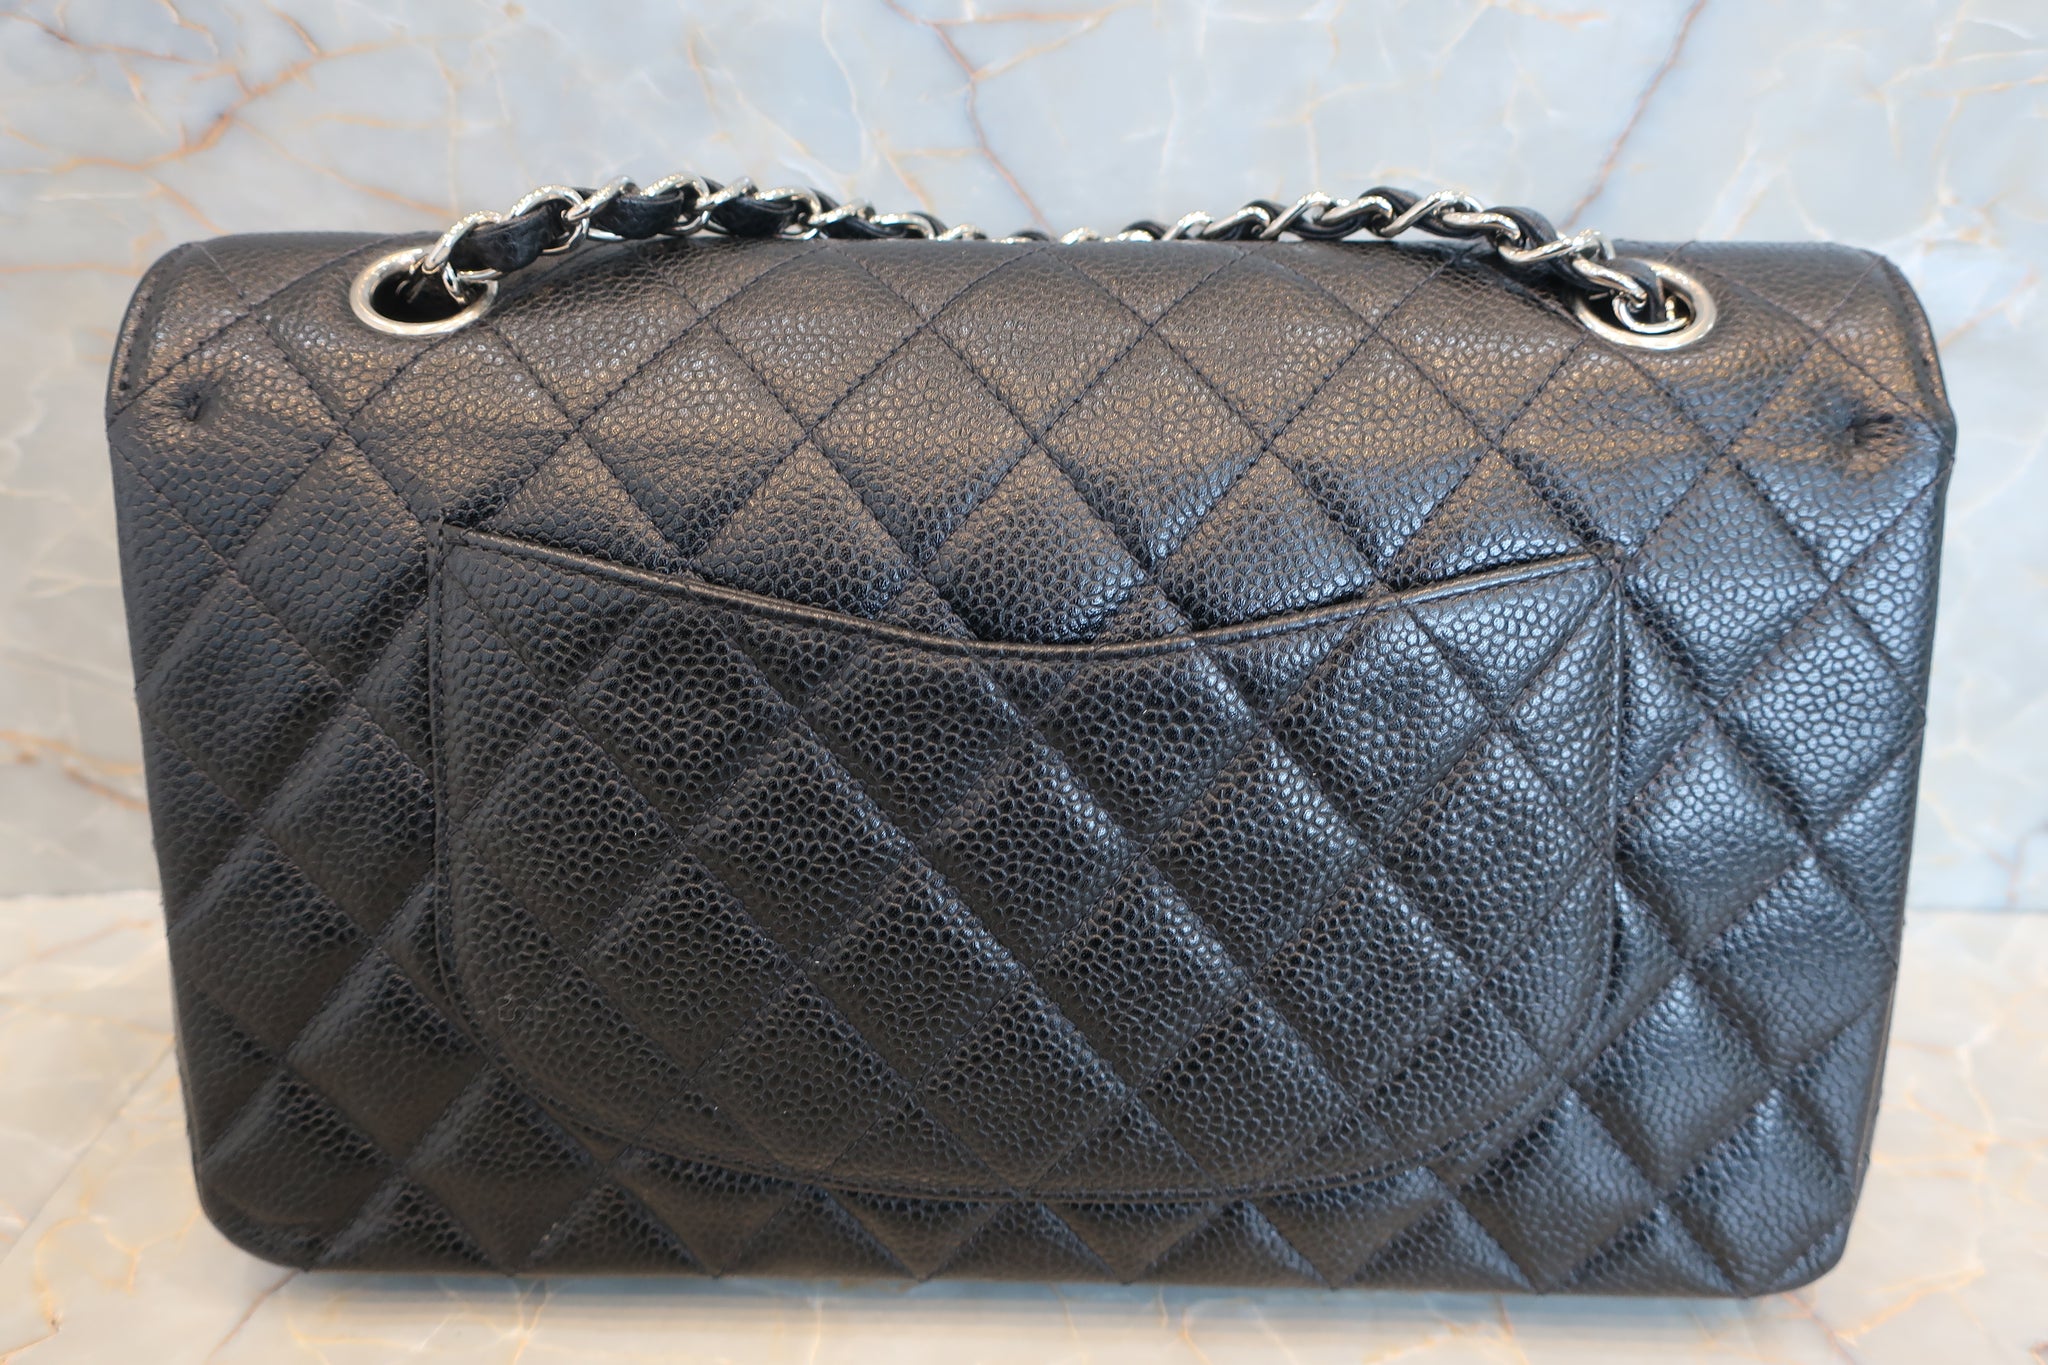 Shop CHANEL MATELASSE Casual Style Elegant Style Shoulder Bags by